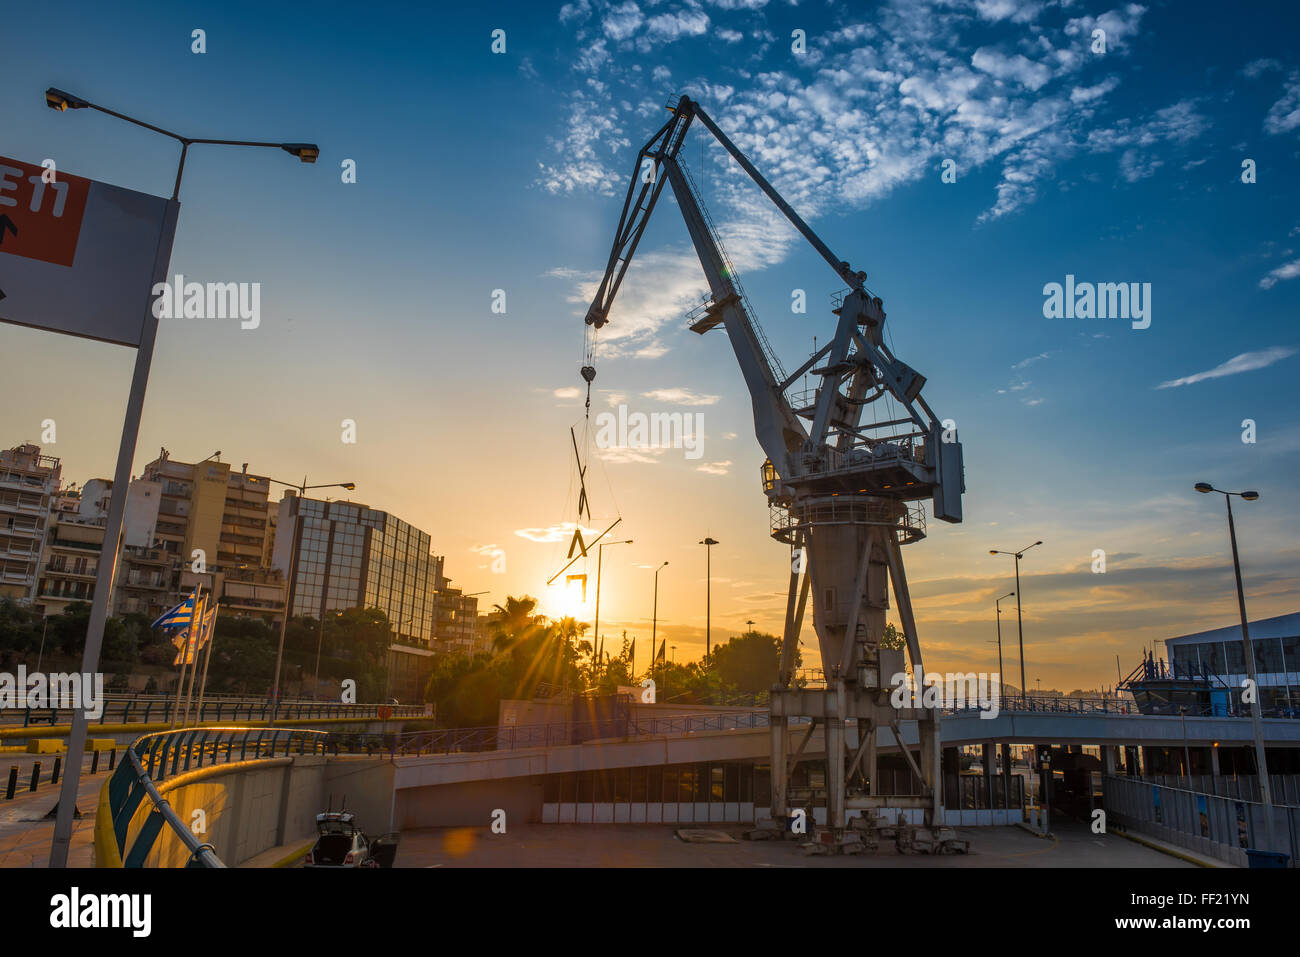 Old sea port crane at sunset in Port of Piraeus, Greece. Wide angle view. Stock Photo